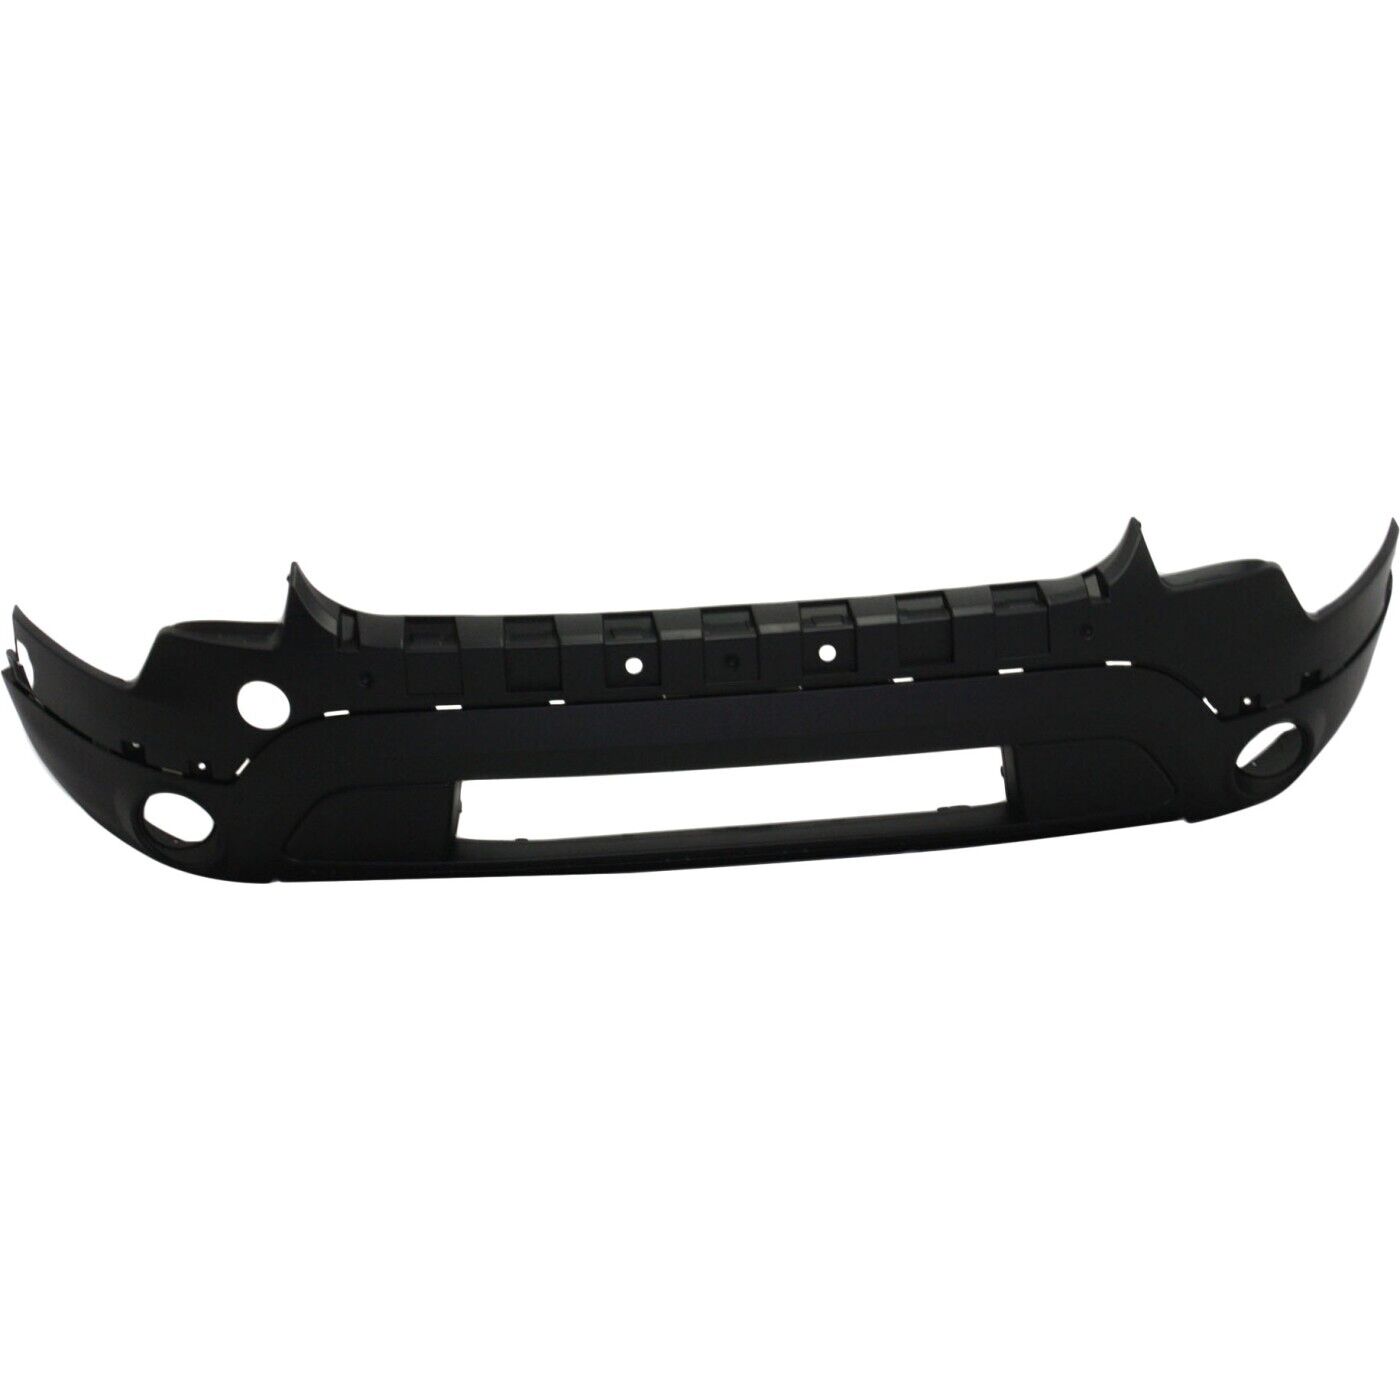 Front Lower Bumper Cover For 2011-2015 Ford Explorer Textured Black